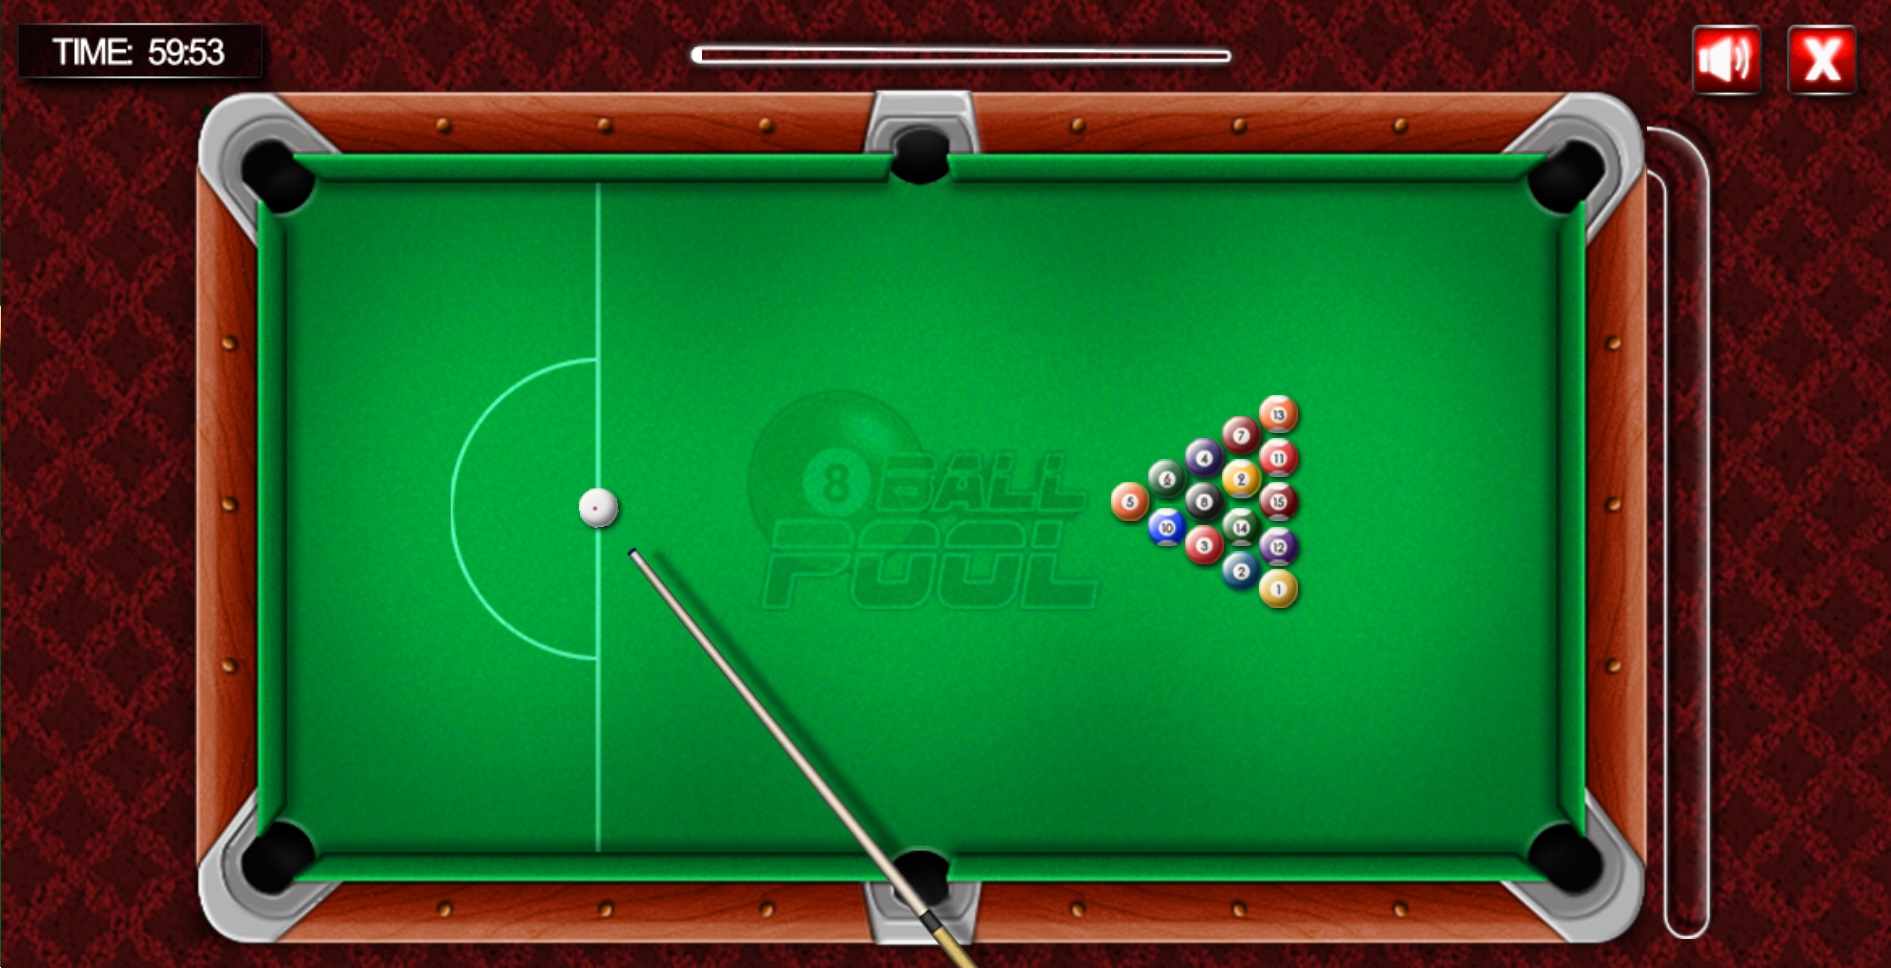 Construct Game 8 Ball Pool Code This Lab srl